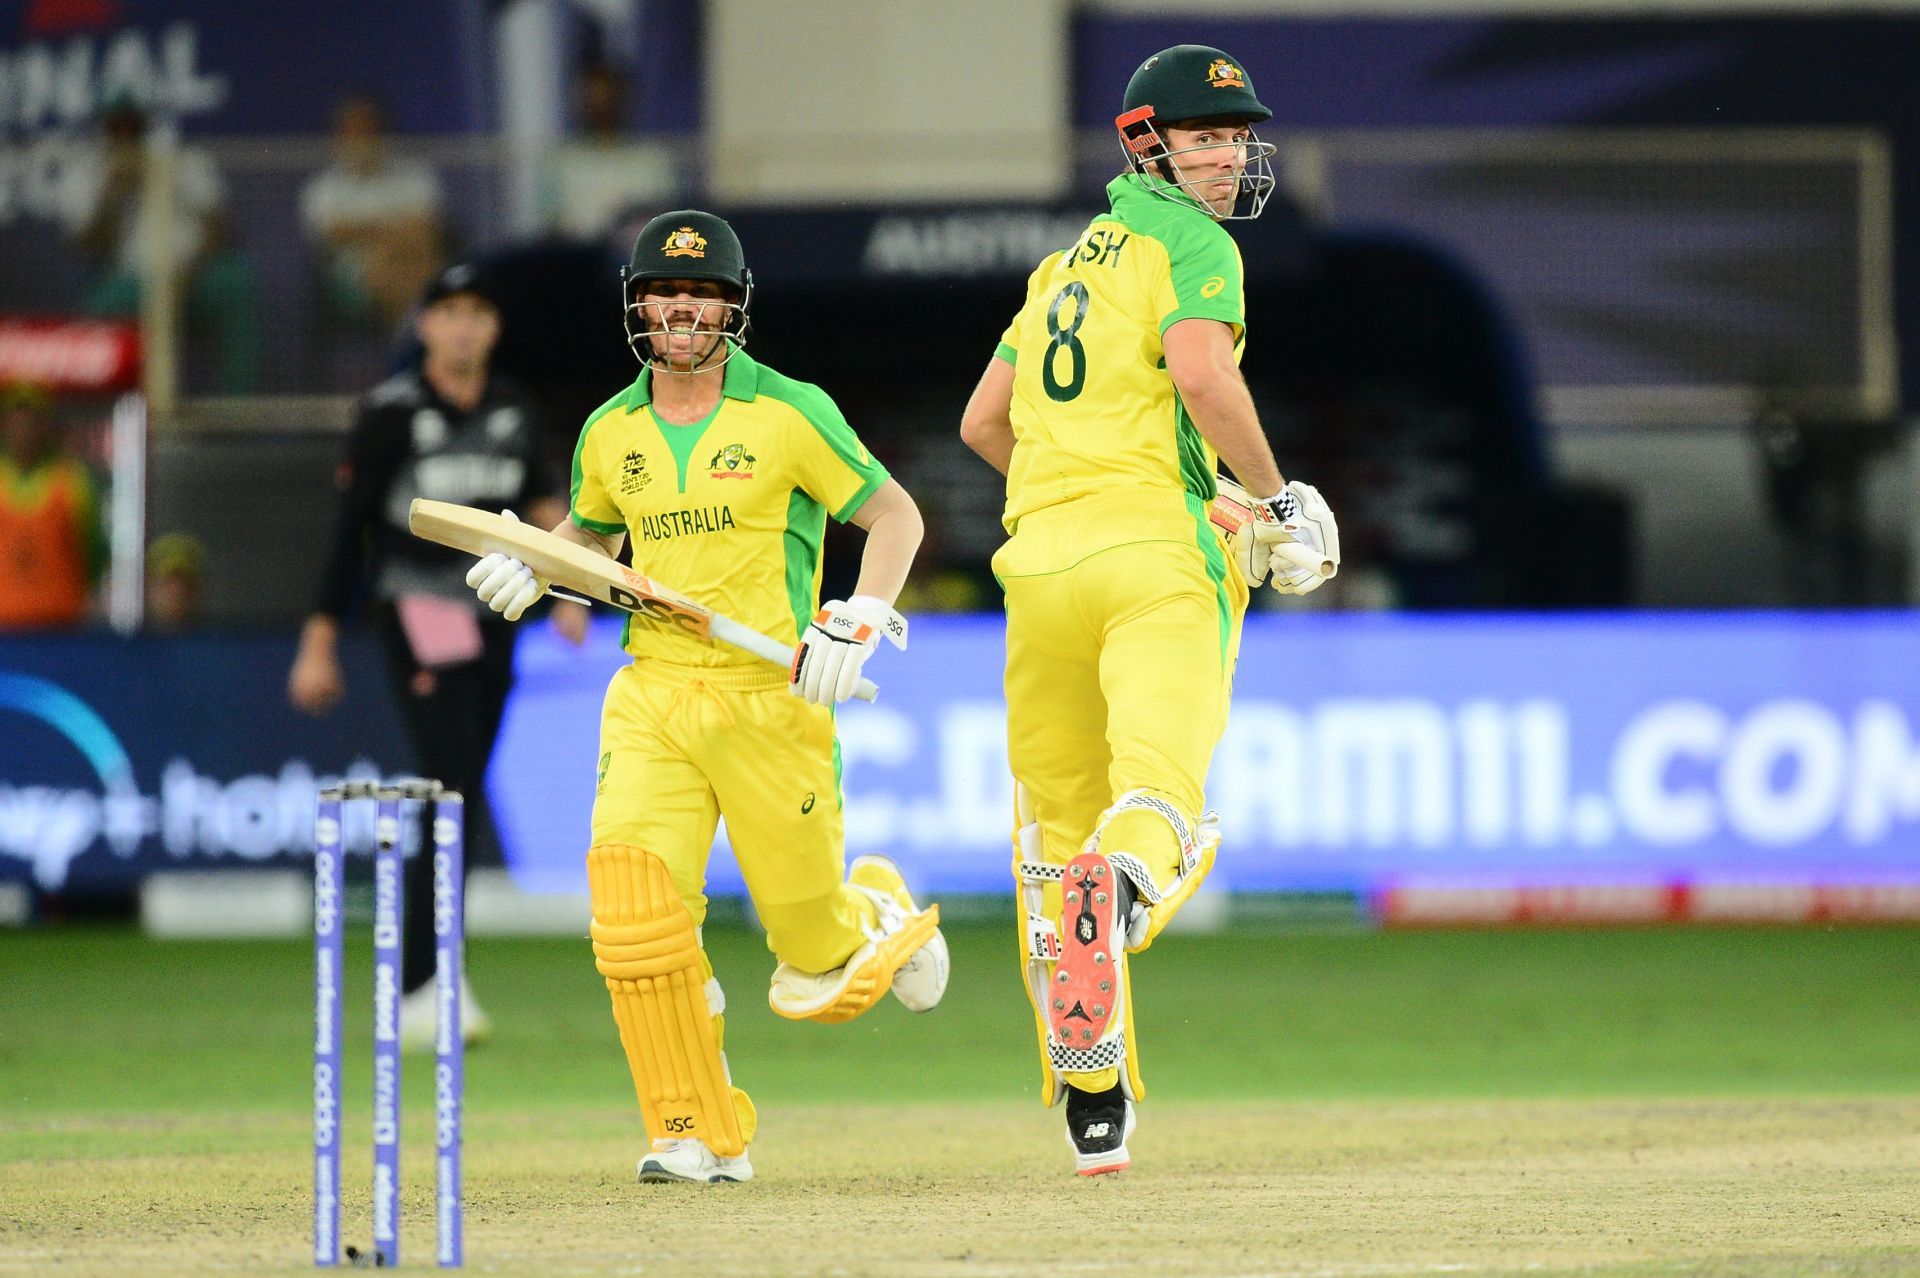 David Warner (left) and Mitchell Marsh were two heroes for Australia in their maiden T20 World Cup triumph in 2021.